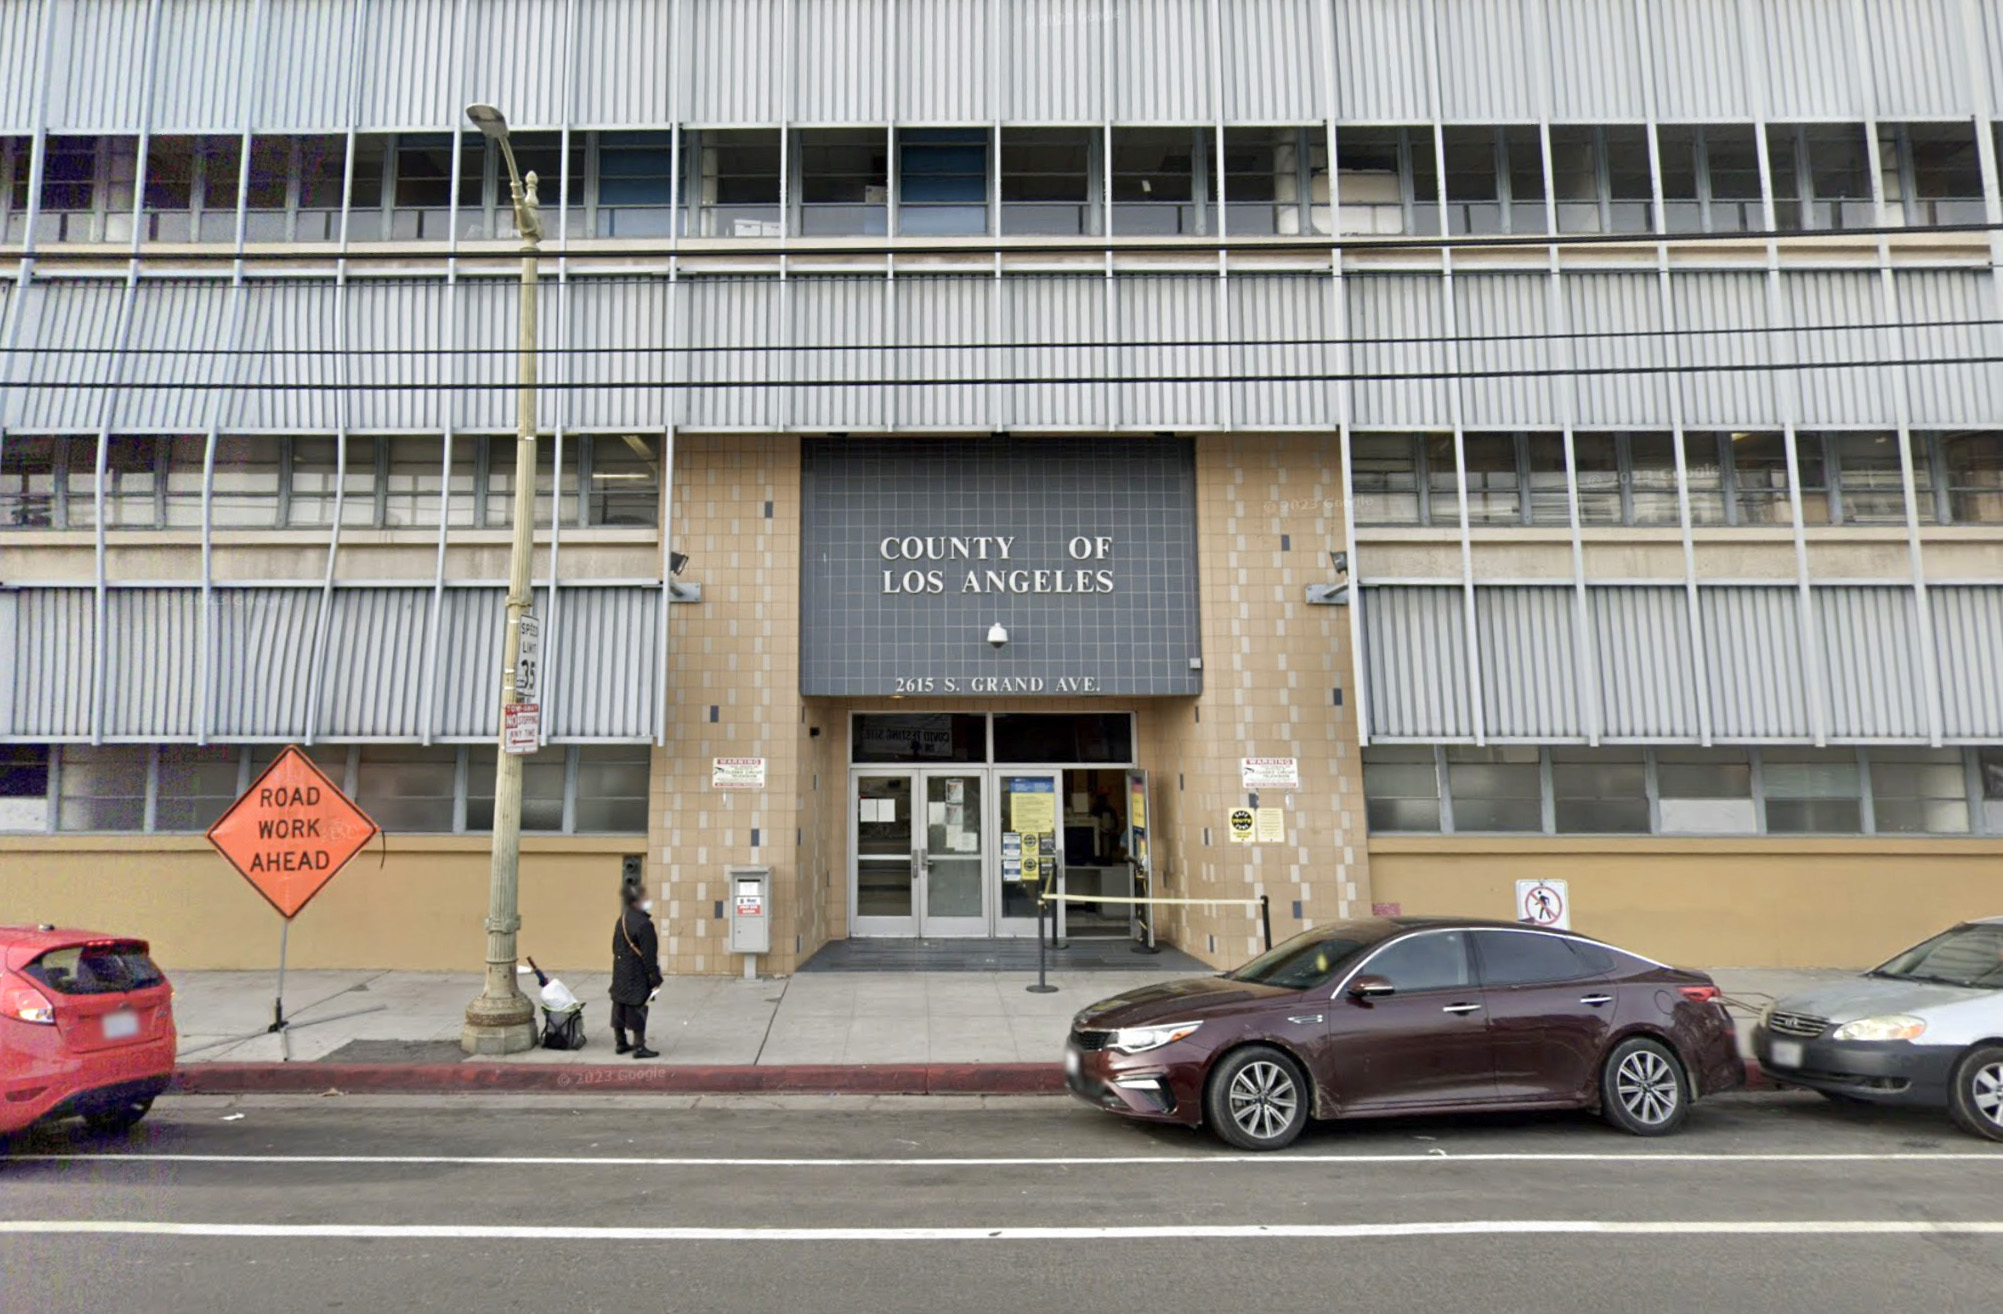 Los Angeles County Dept. of Public Health at 2615 S Grand Ave #500, in Los Angeles.